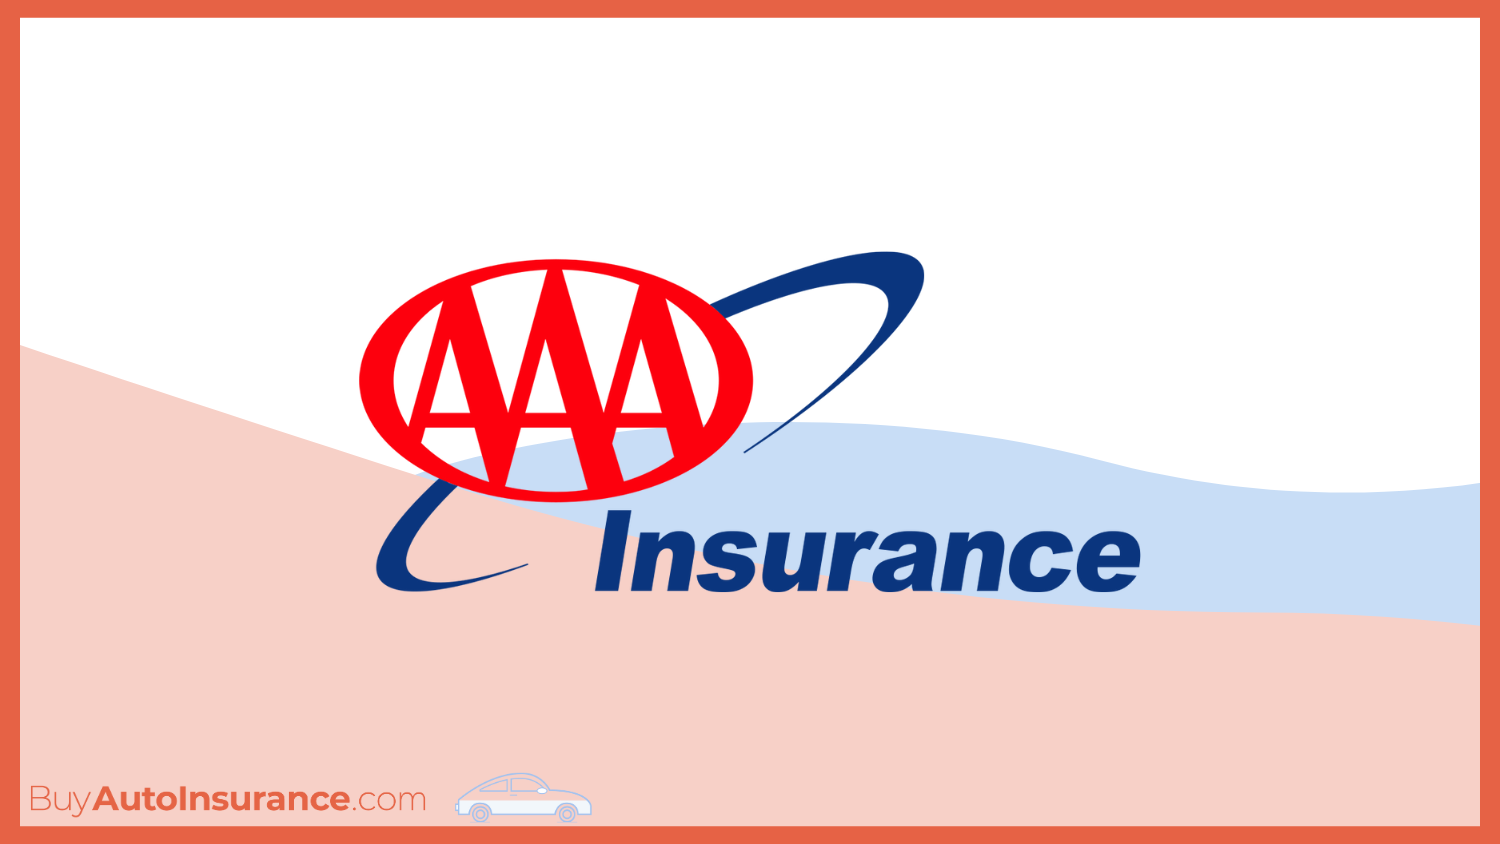 AAA: Best Auto Insurance Companies That Don't Use LexisNexis